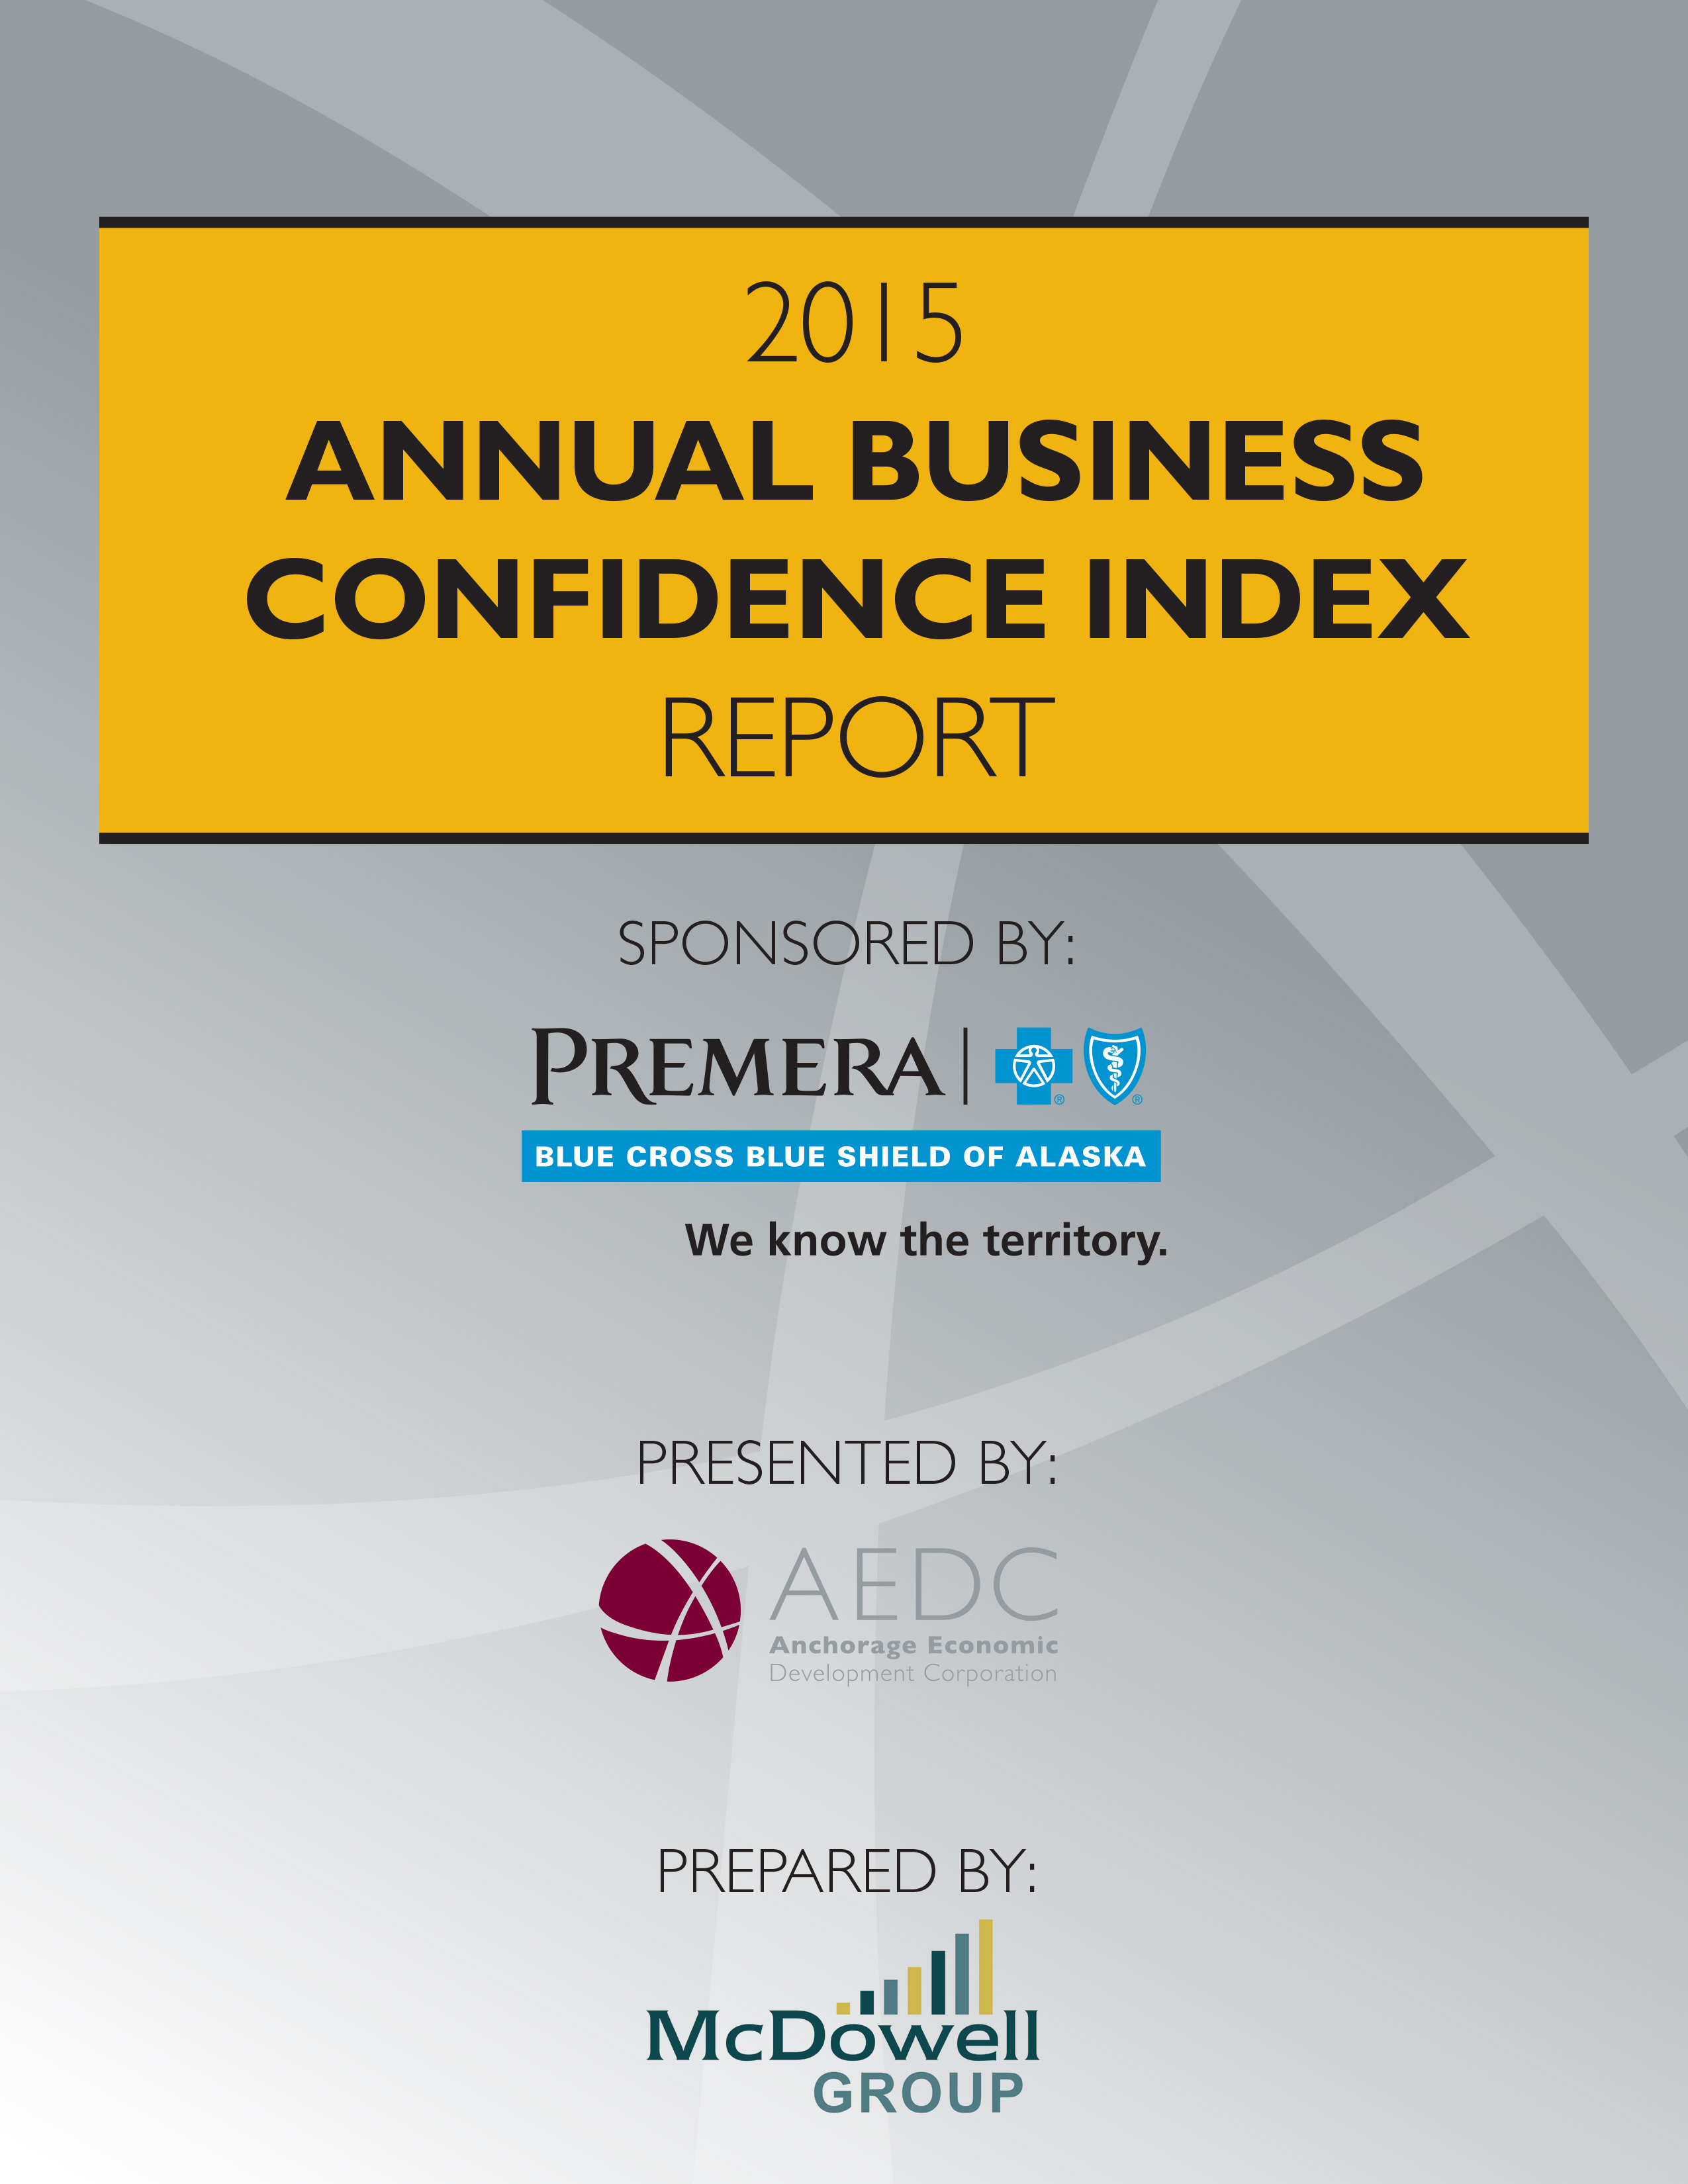 Business Confidence Index Report: 2015